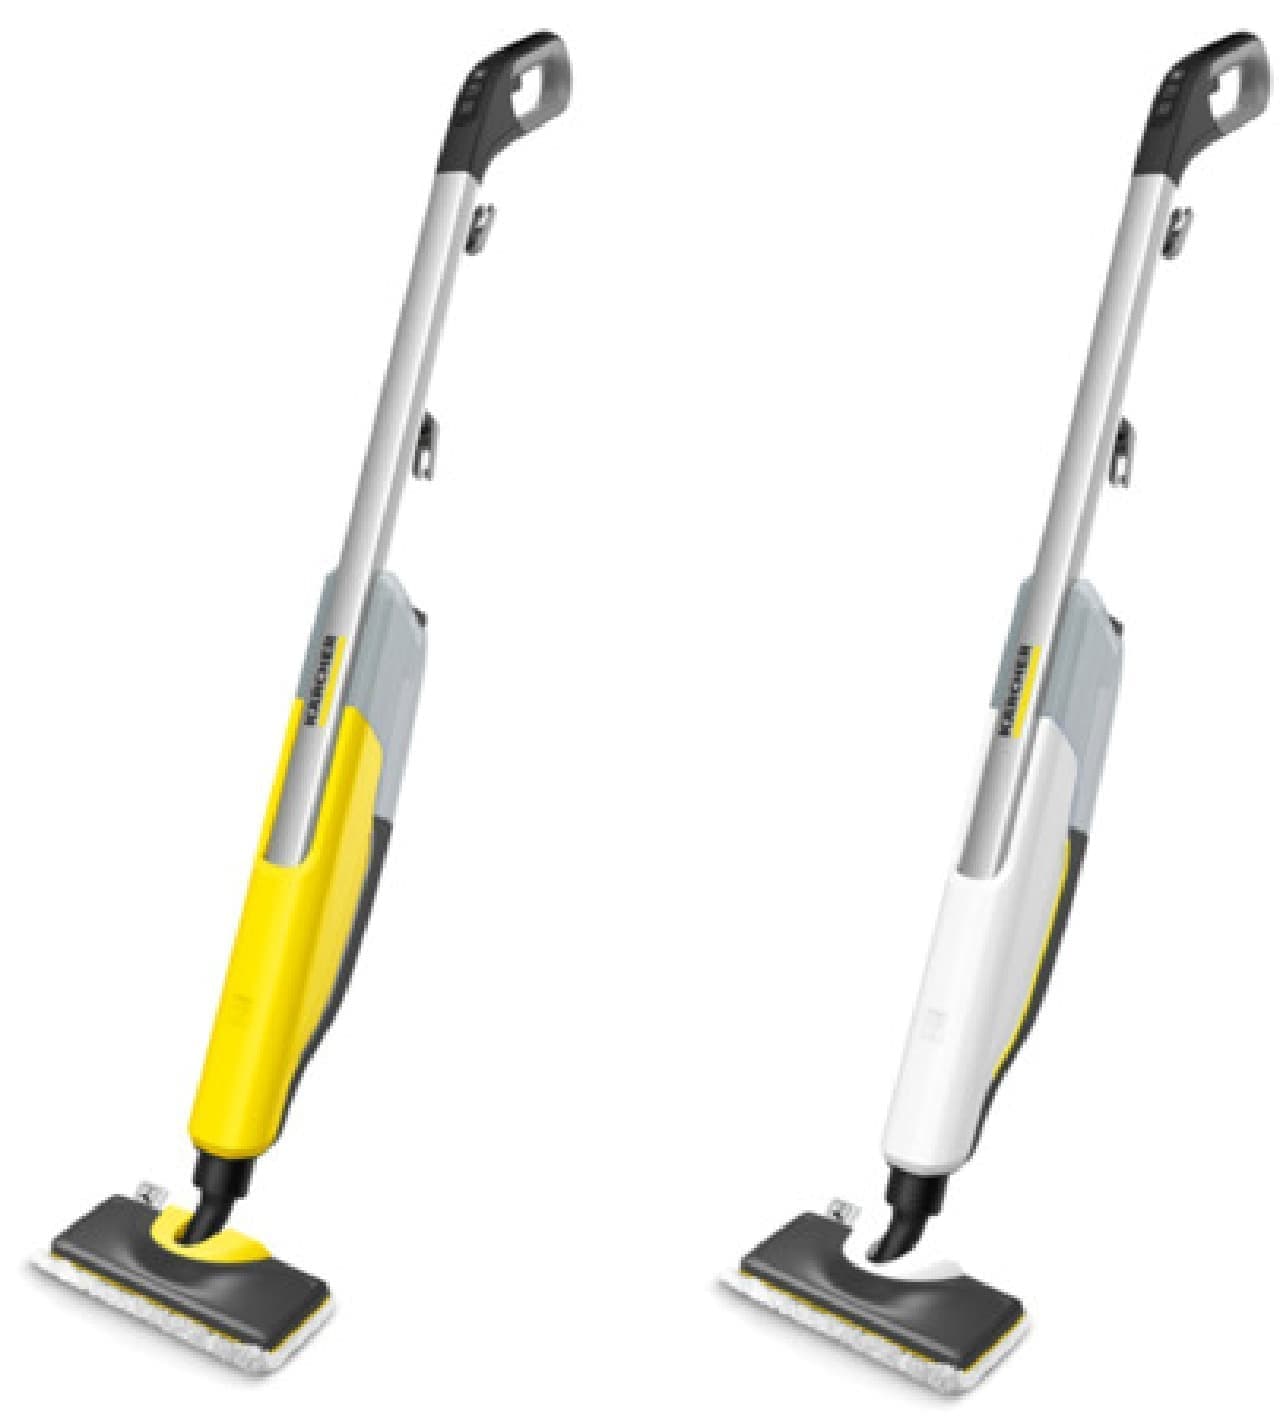 Household steam mop "SC Upright / SC Upright Premium" from Karcher --High temperature steam makes dirt clean and gaps easier